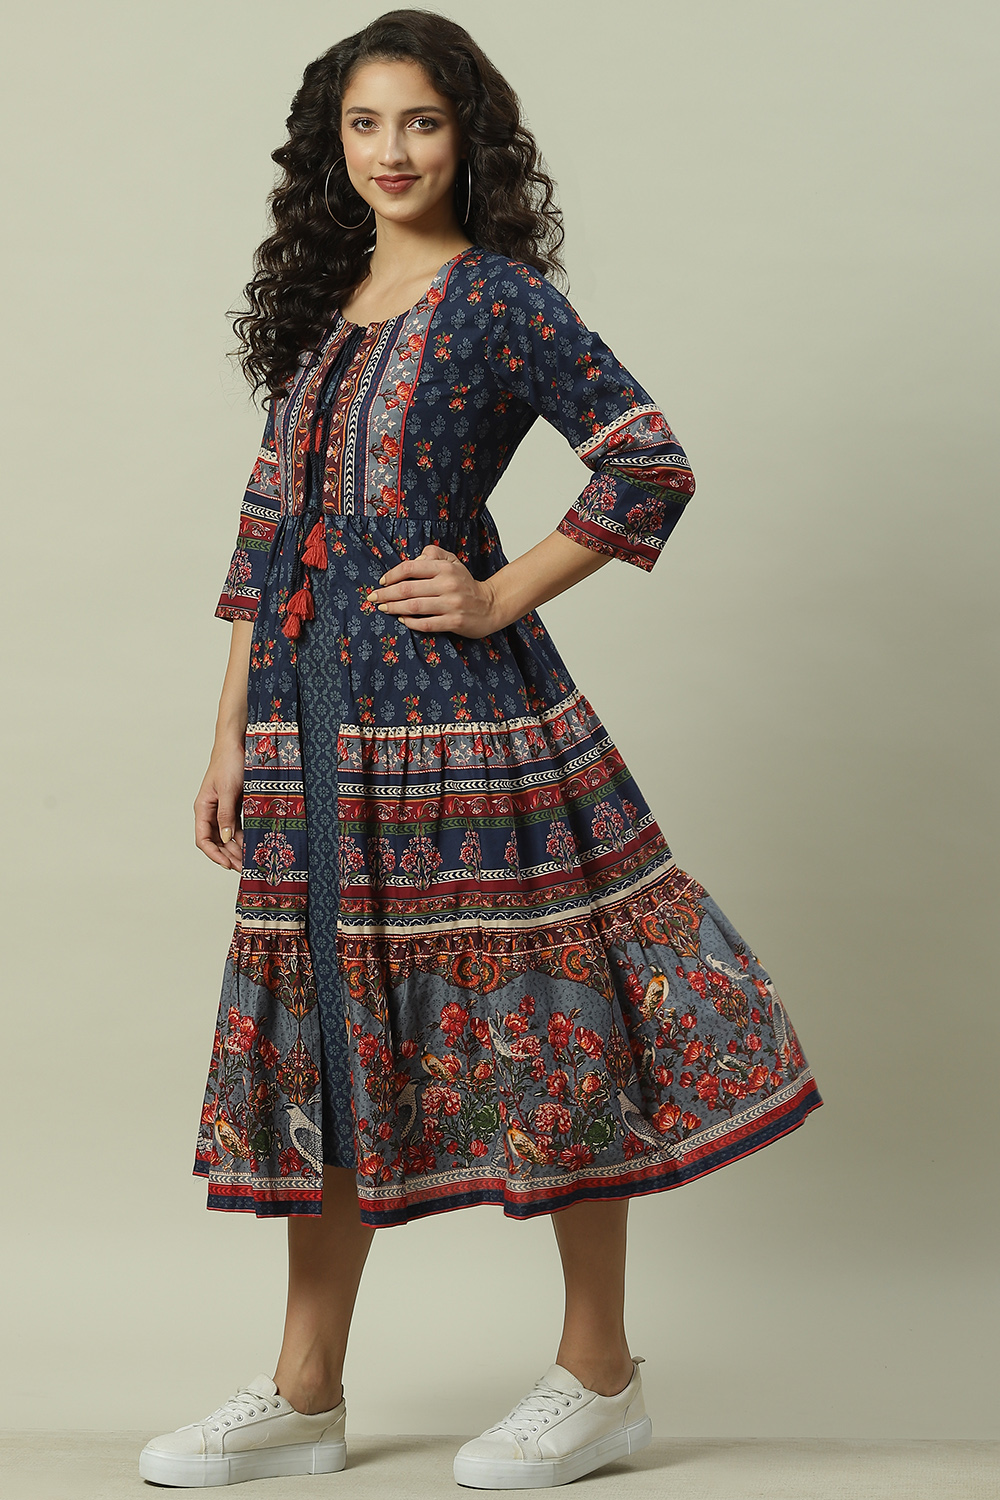 Buy Blue Cotton Fusion Dress with Printed Jacket for INR2399.40 |Biba India